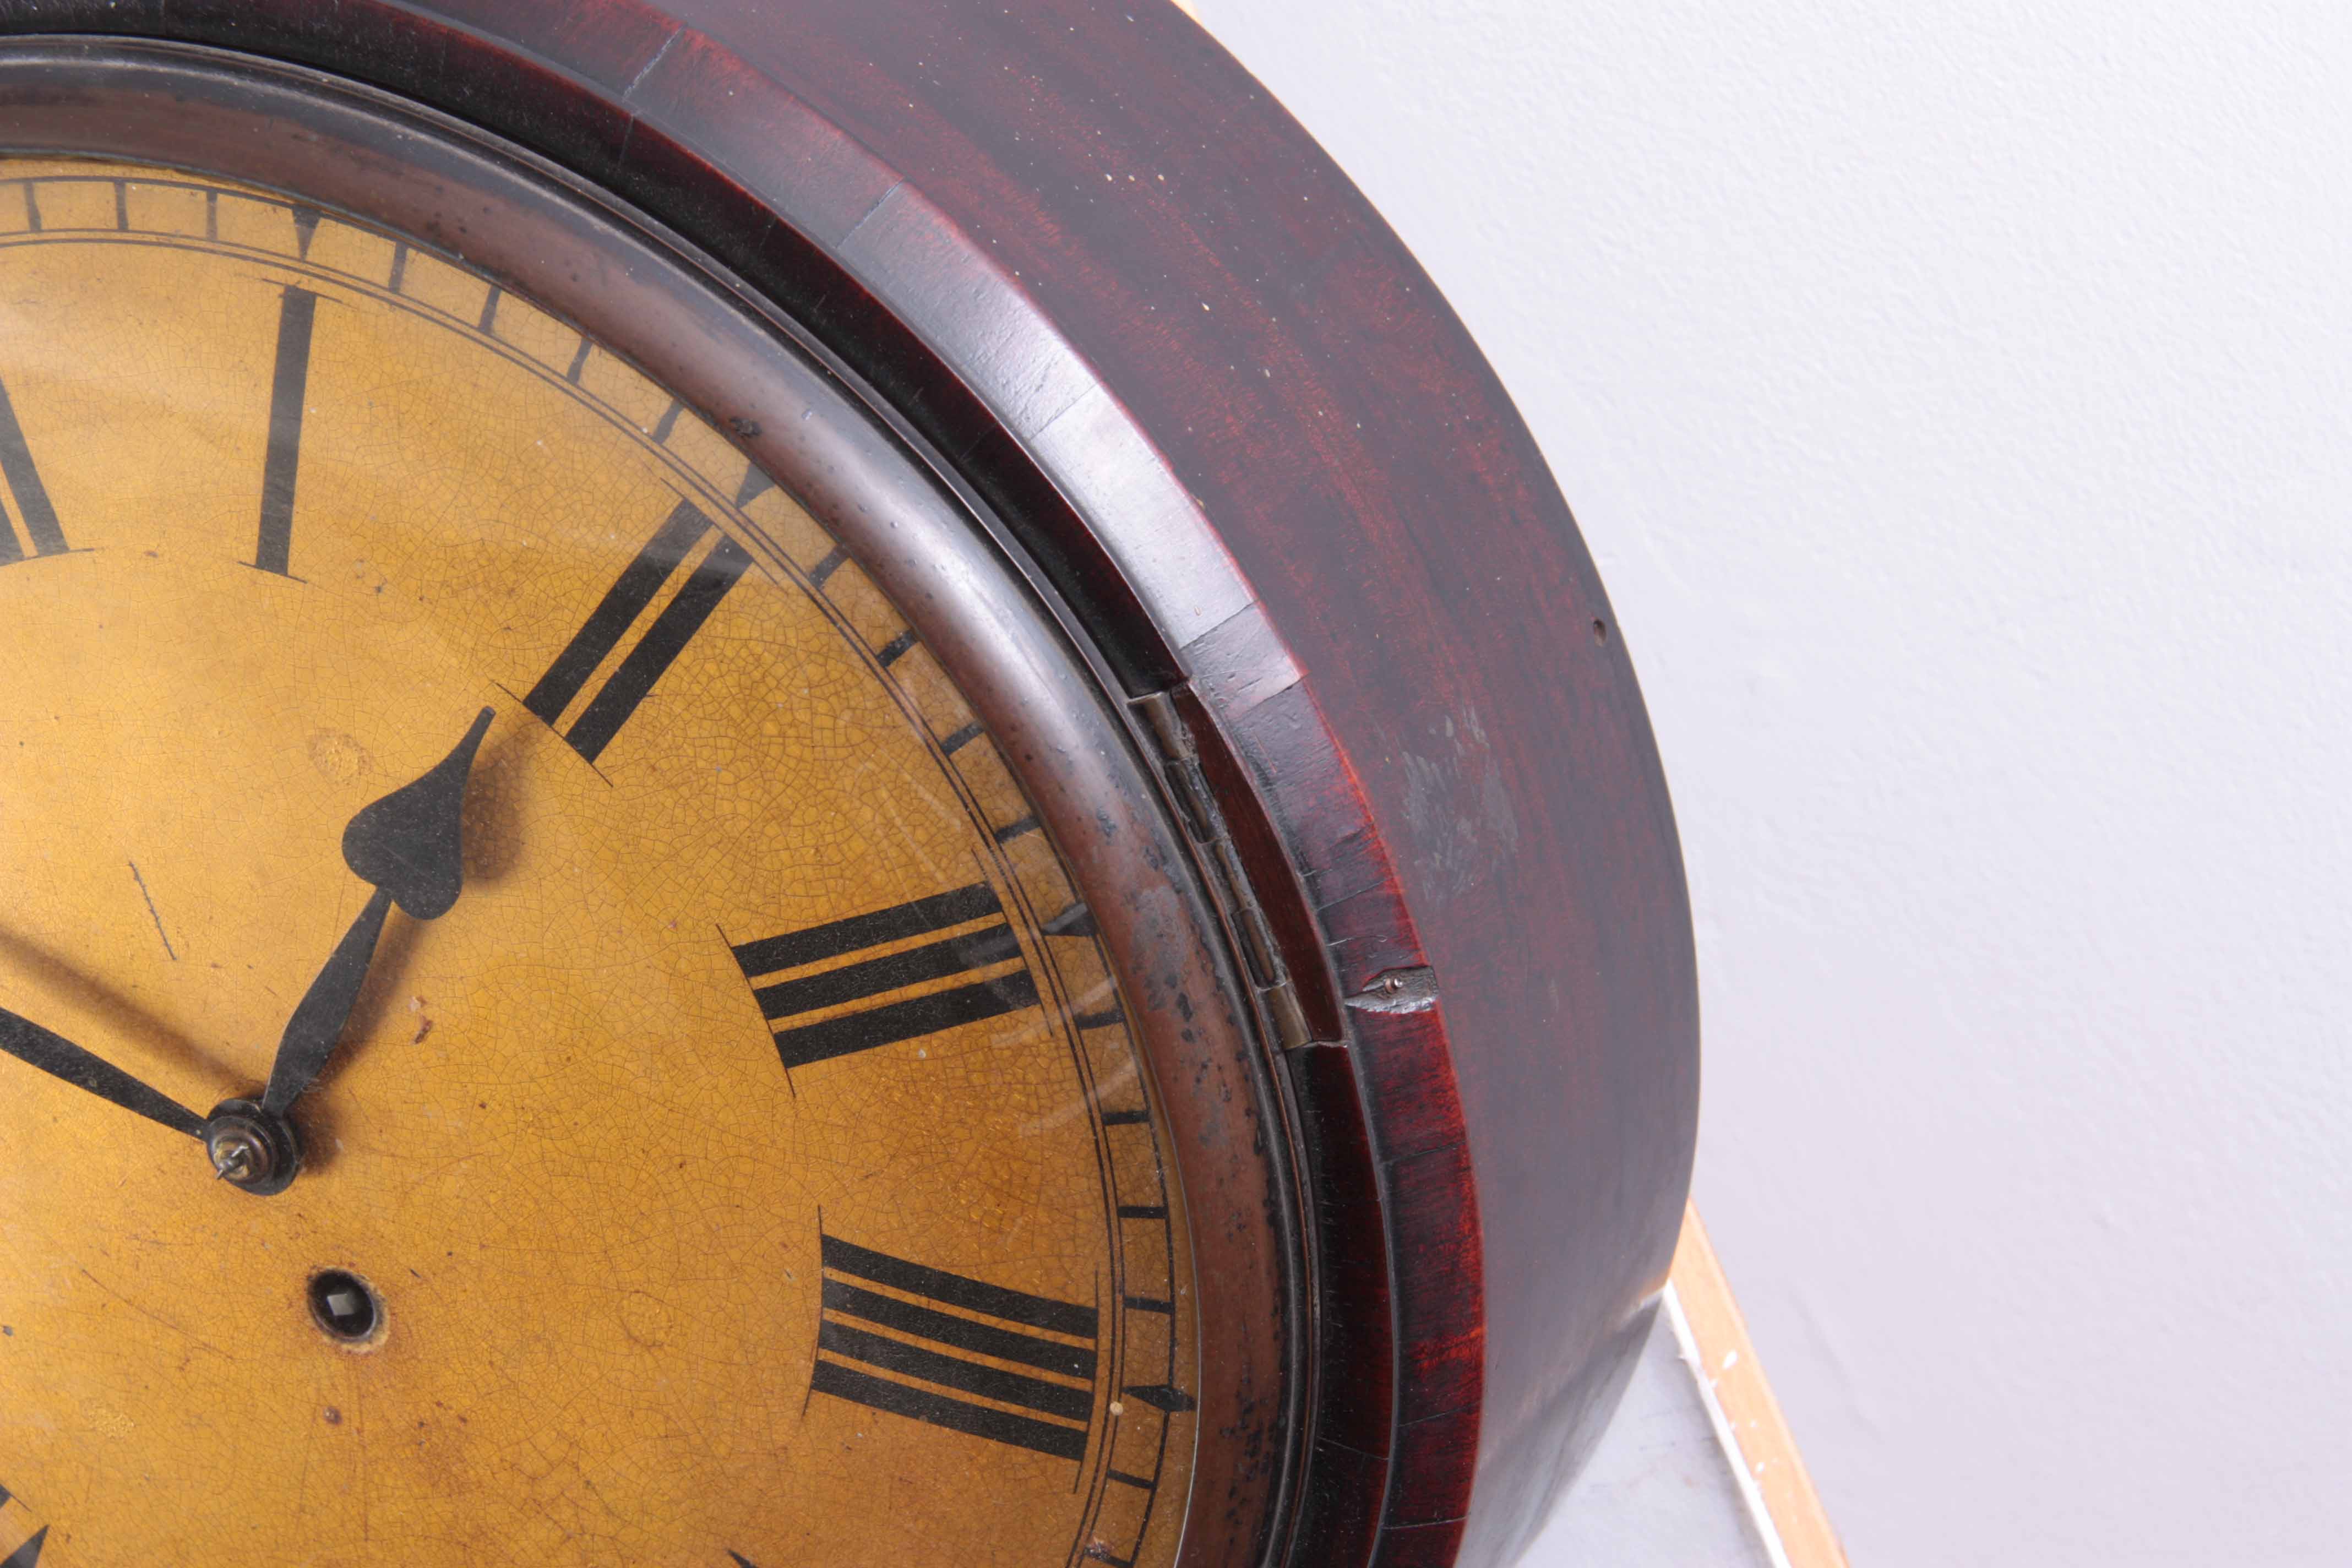 BRYSON, EDINBURGH. AN EARLY 19TH CENTURY SCOTTISH MAHOGANY WALL CLOCK having a drum-shaped case with - Image 12 of 13